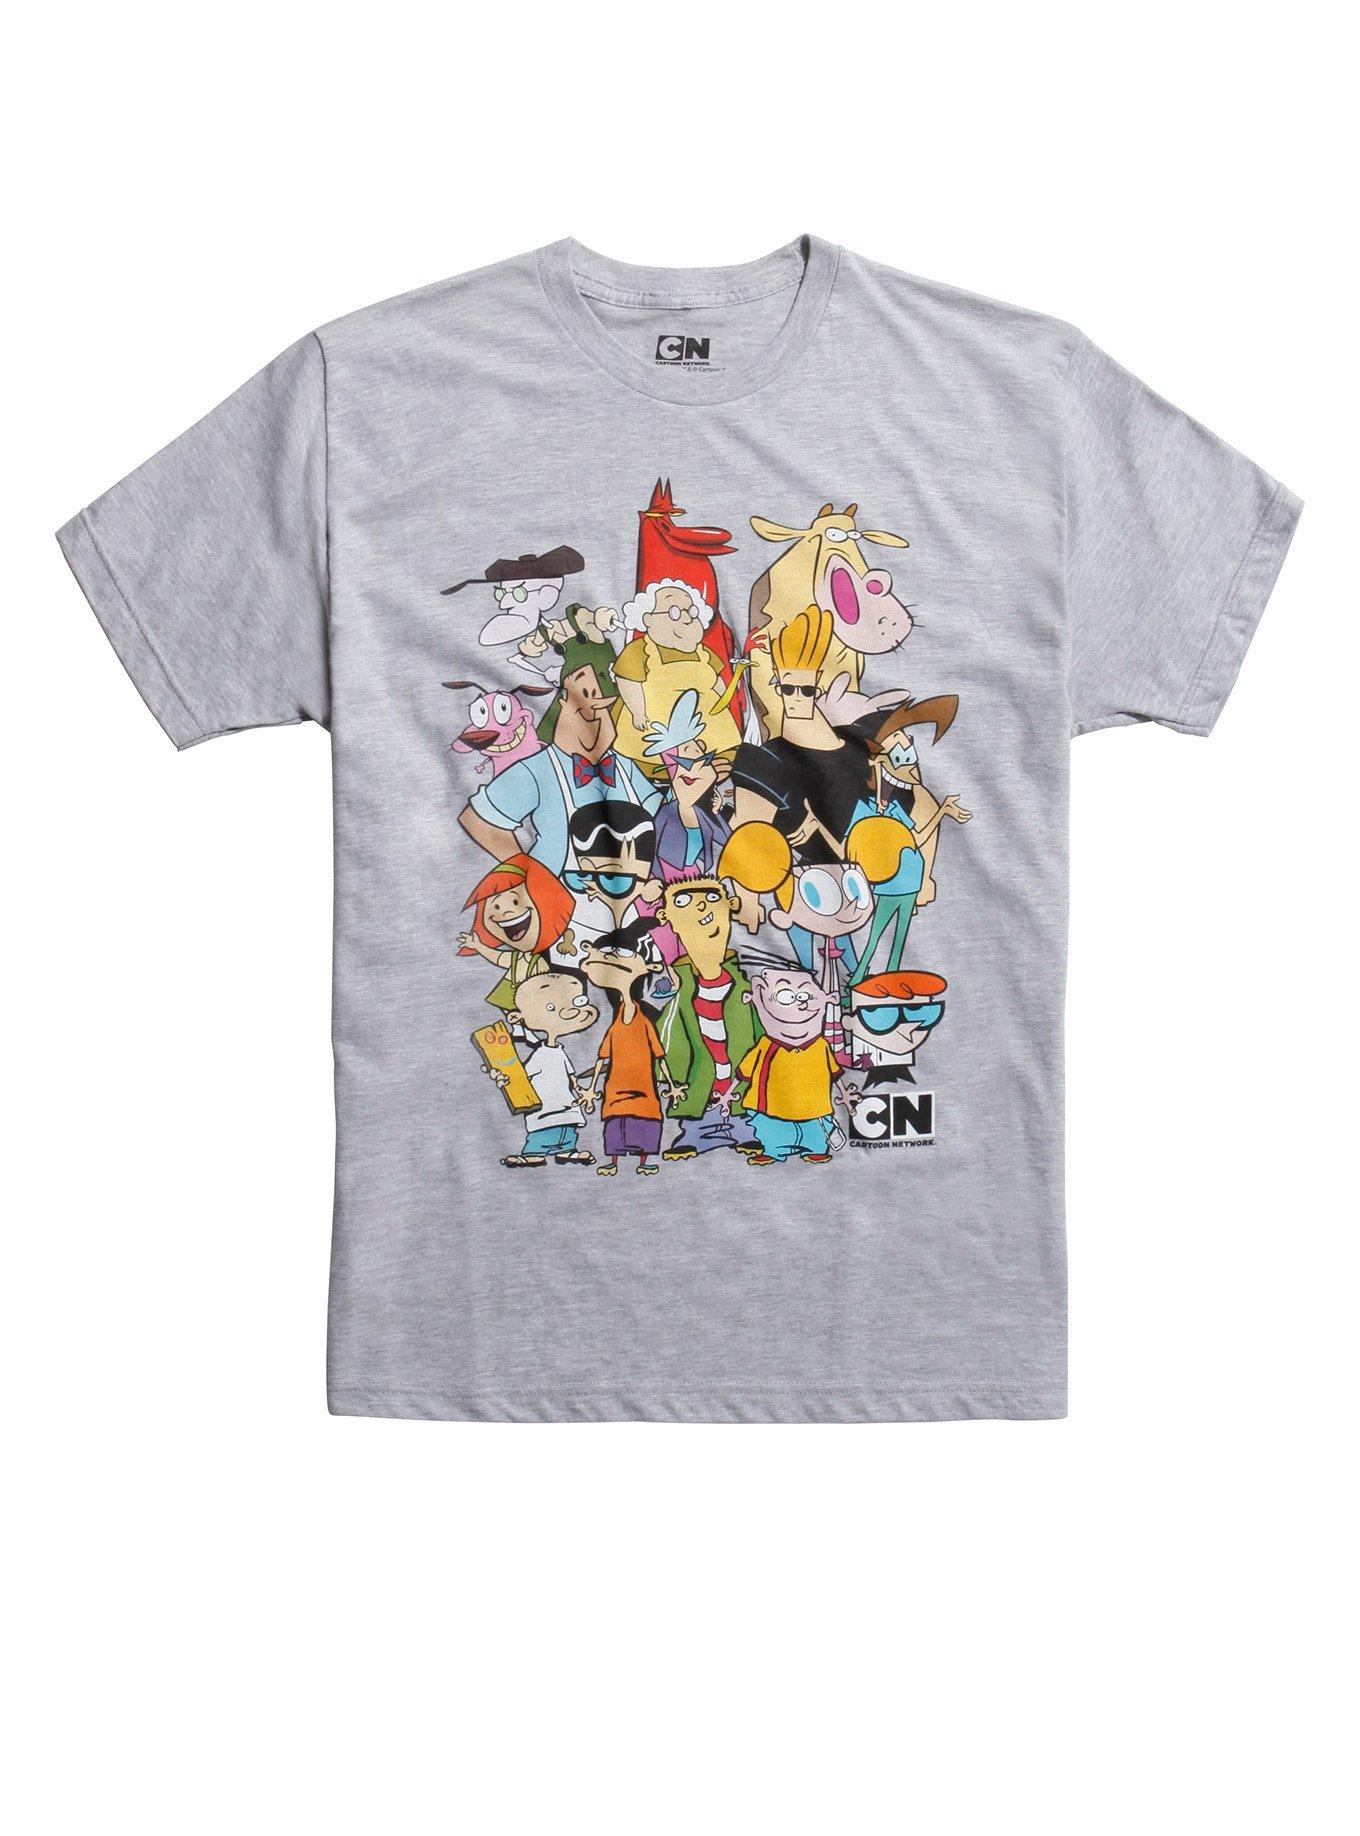 Cartoon Network Characters Collage T-Shirt | Hot Topic